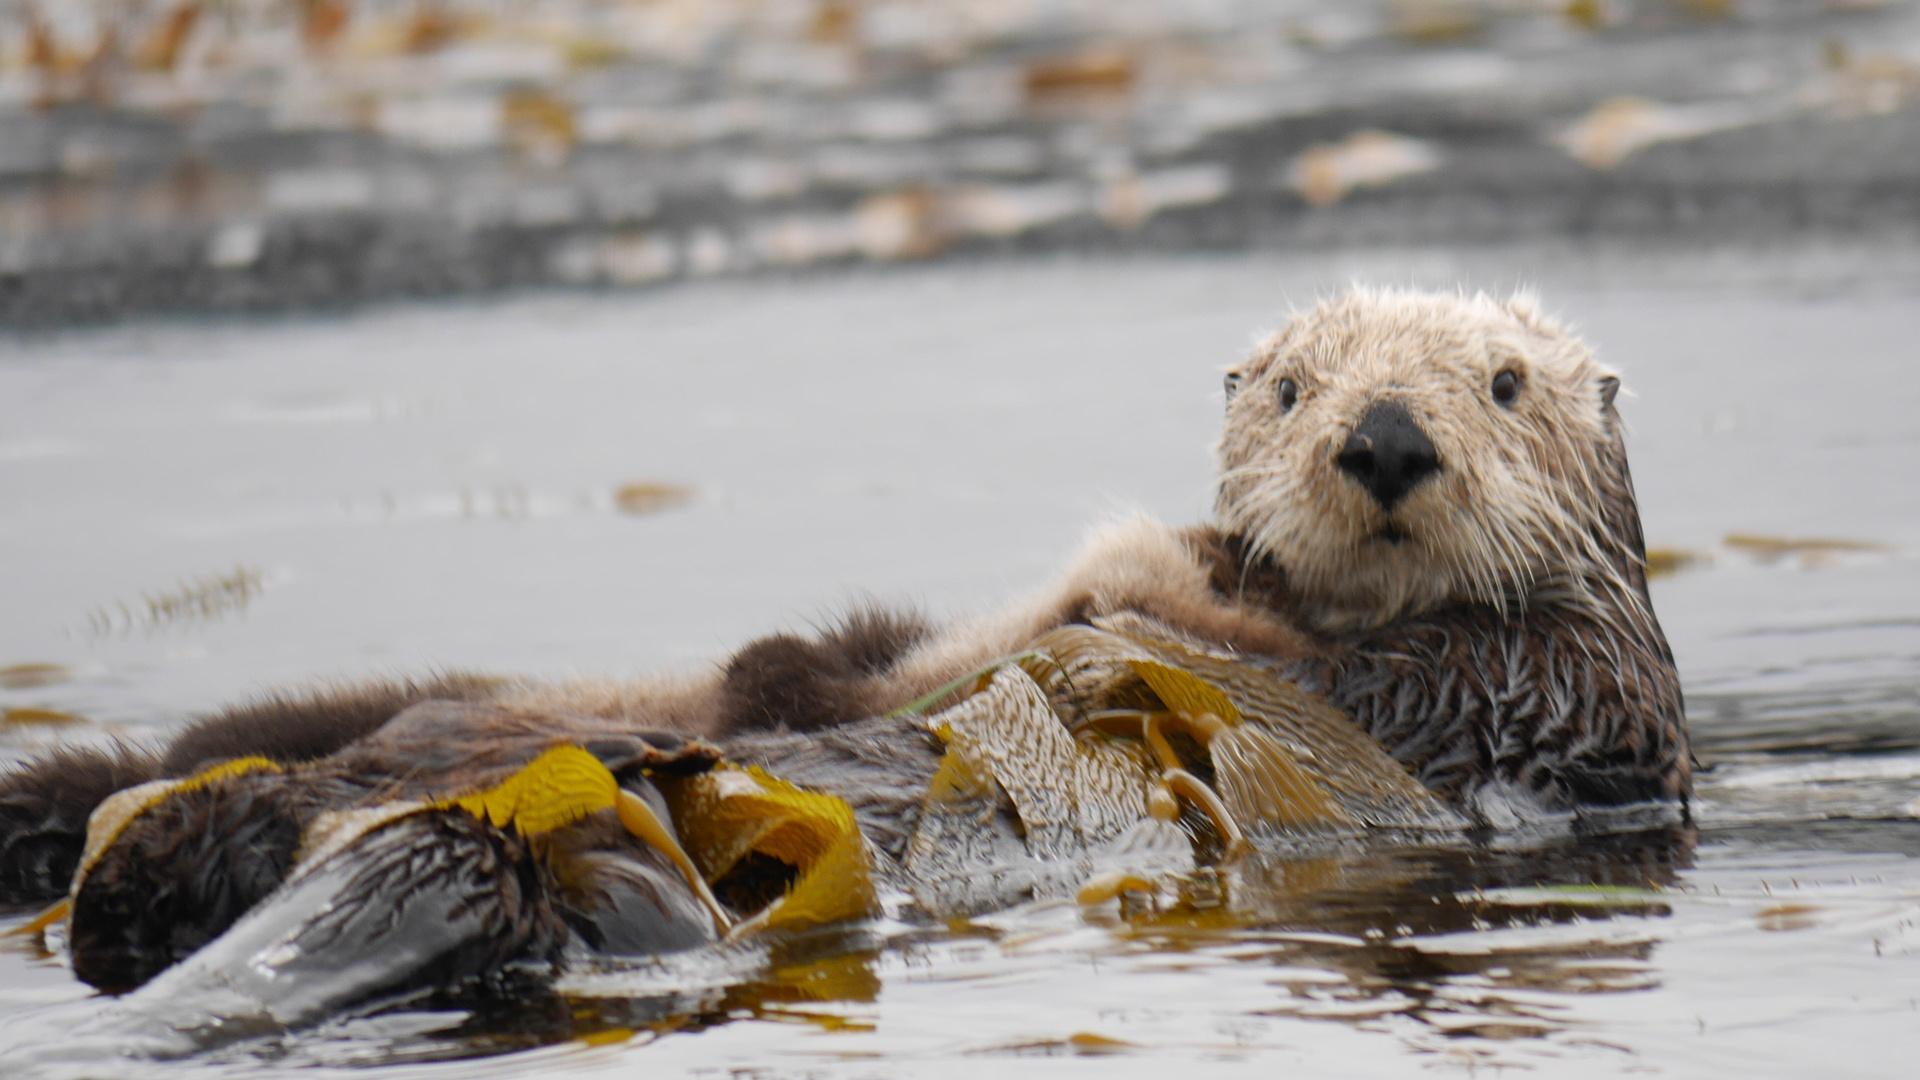 Sea otter at Monterey Bay in March 2015.